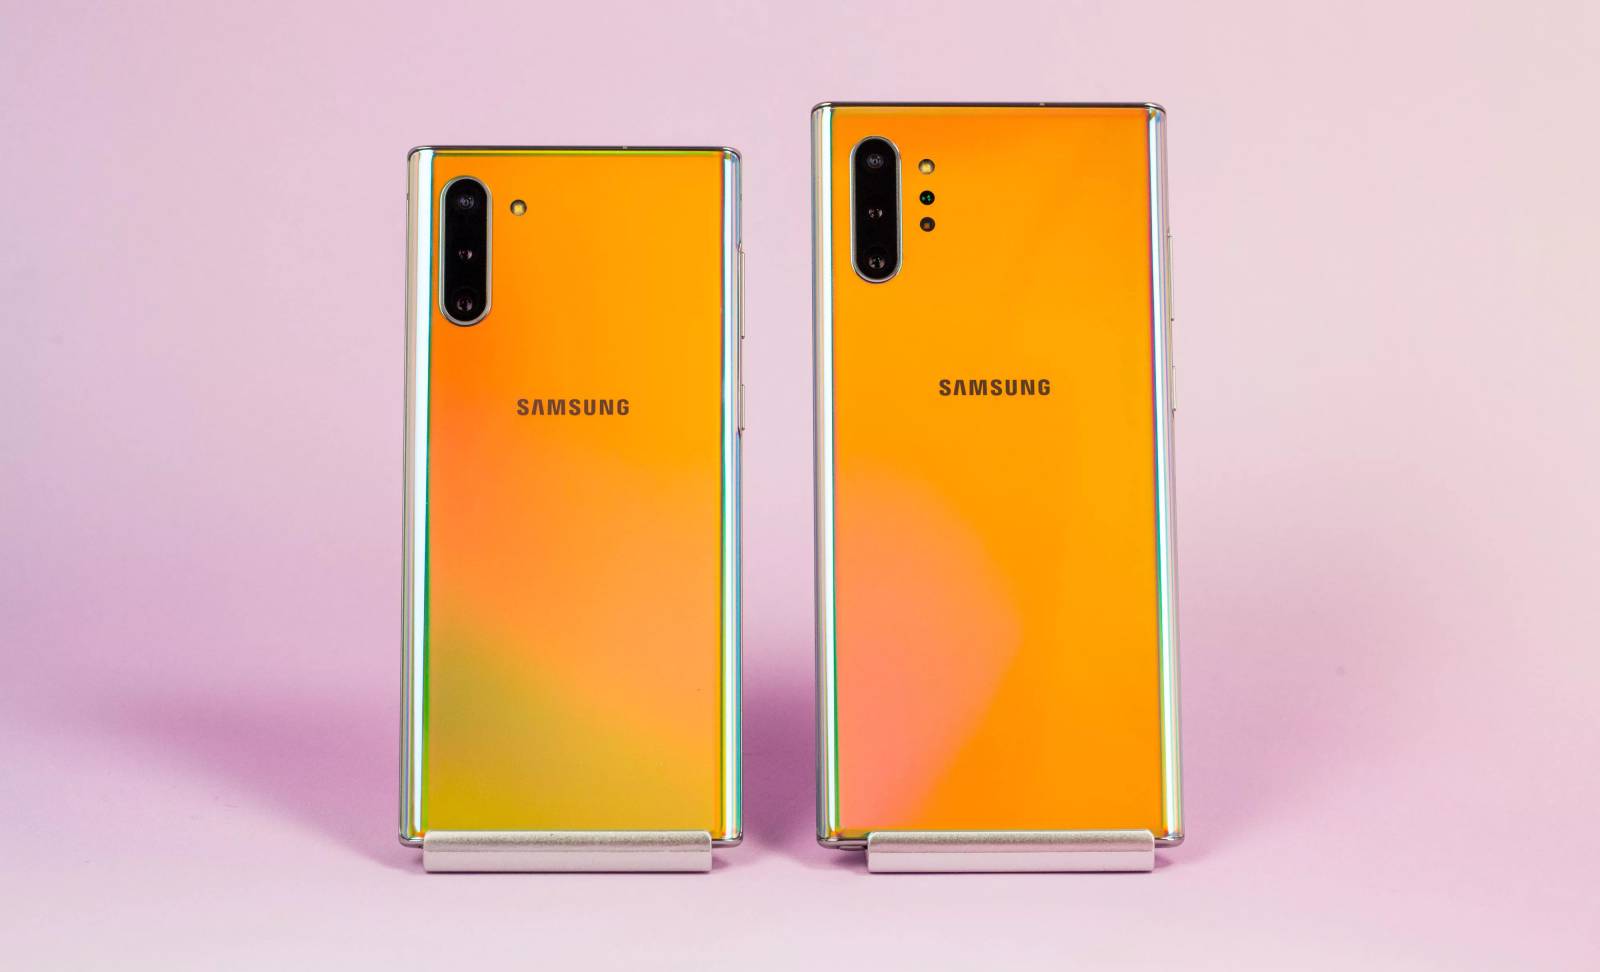 Samsung GALAXY Note 10 email